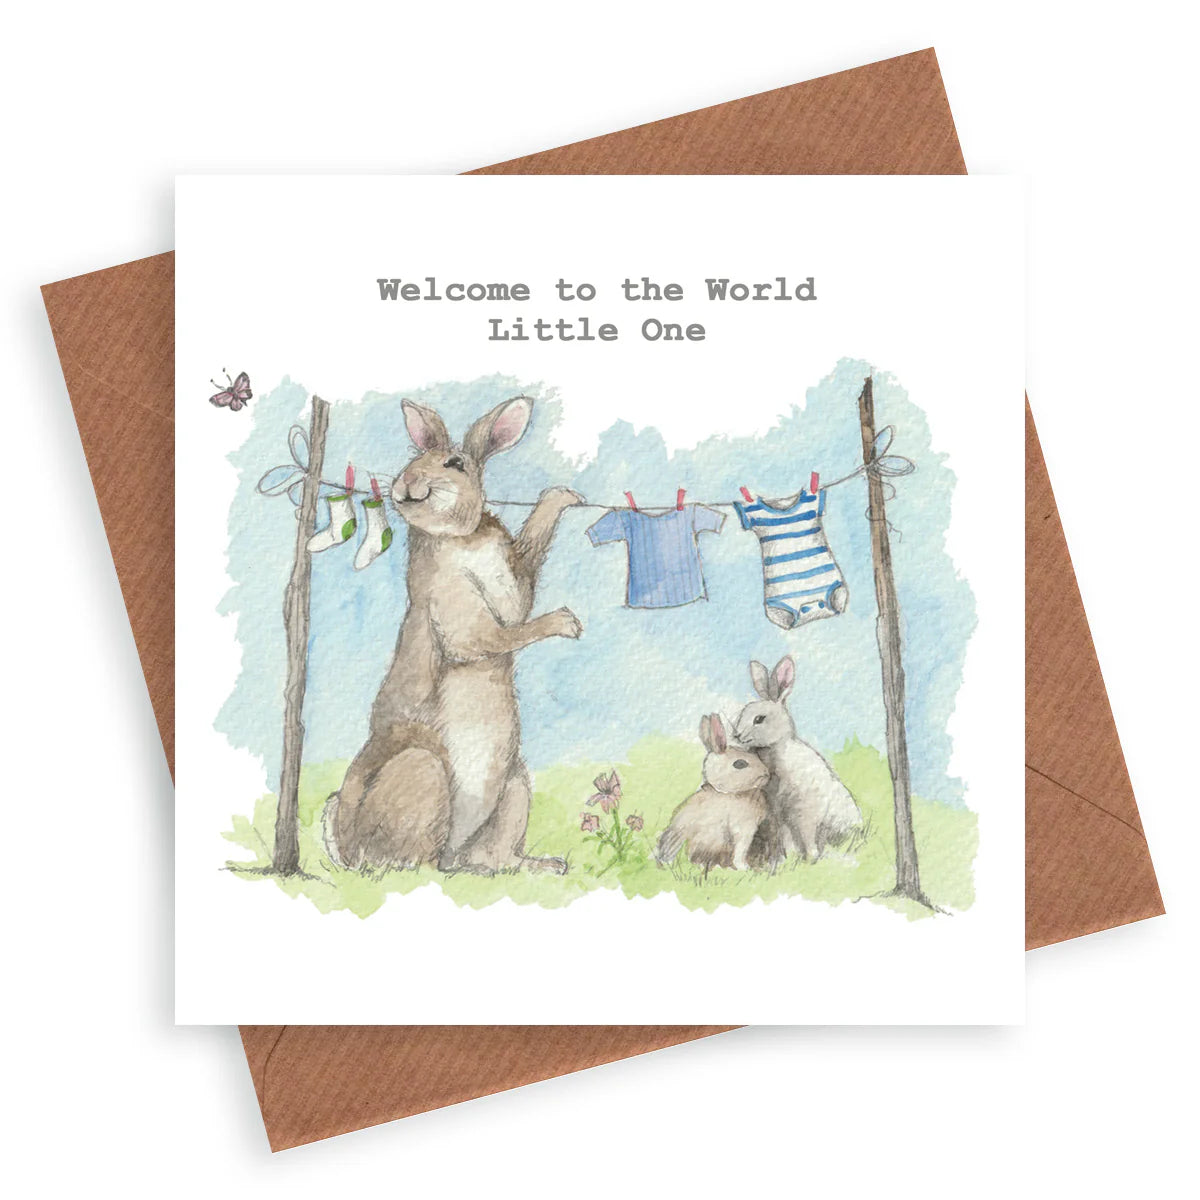 Fabulous Gifts Crumble & Core Welcome To The World Baby Boy Card by Weirs of Baggot Street